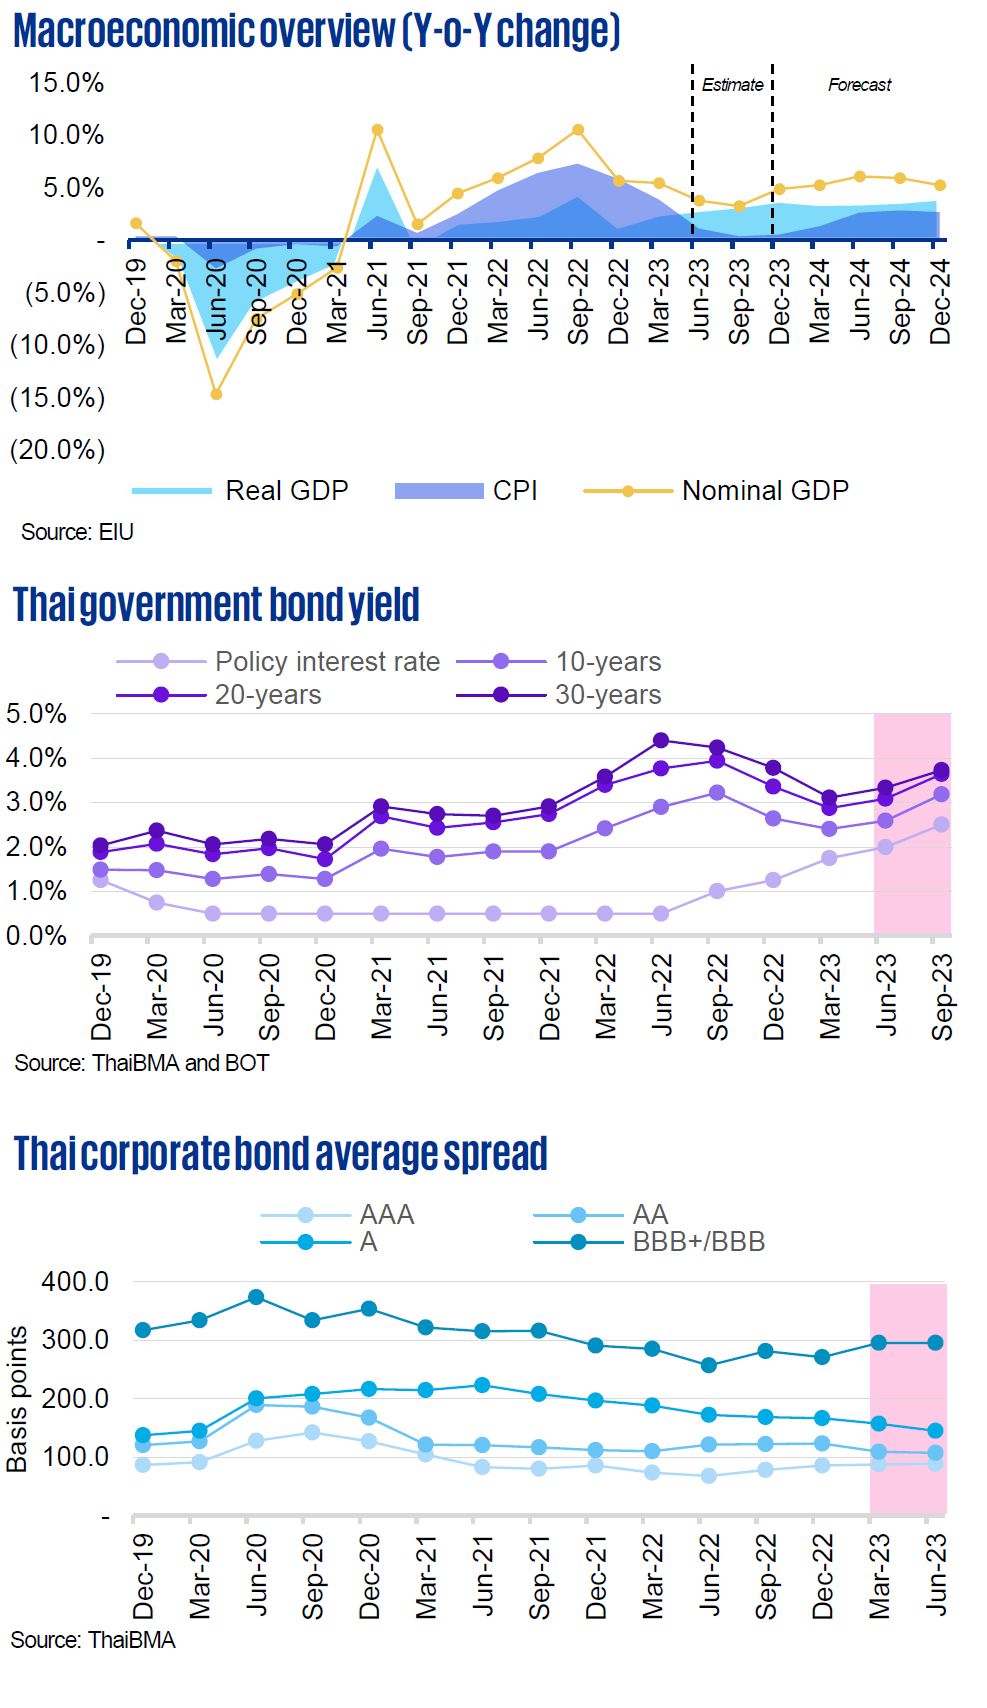 Thai capital market outlook - overview